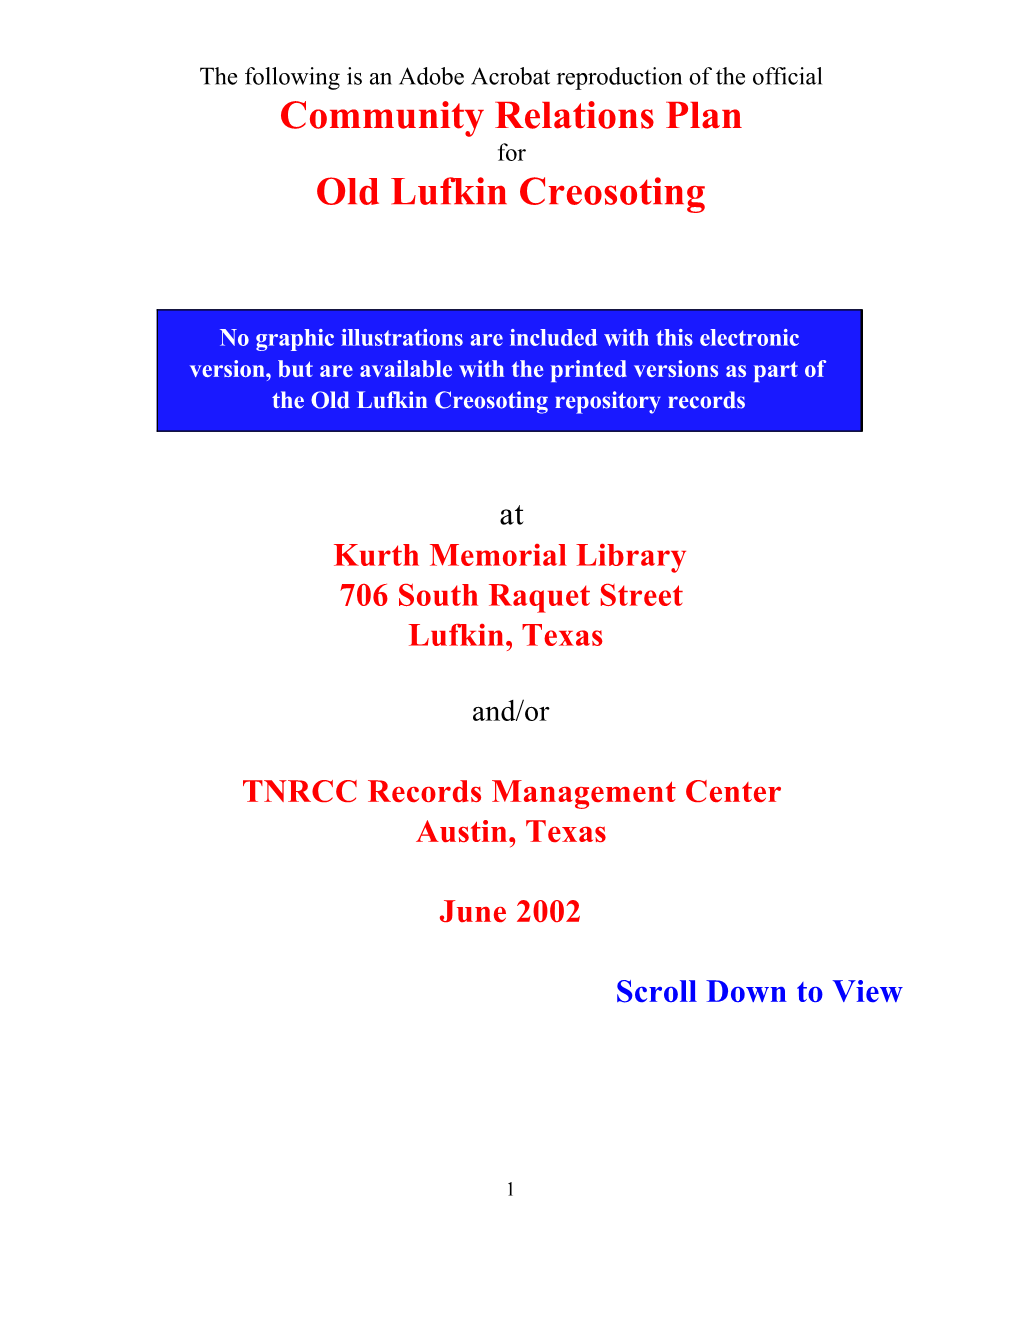 Community Relations Plan Old Lufkin Creosoting